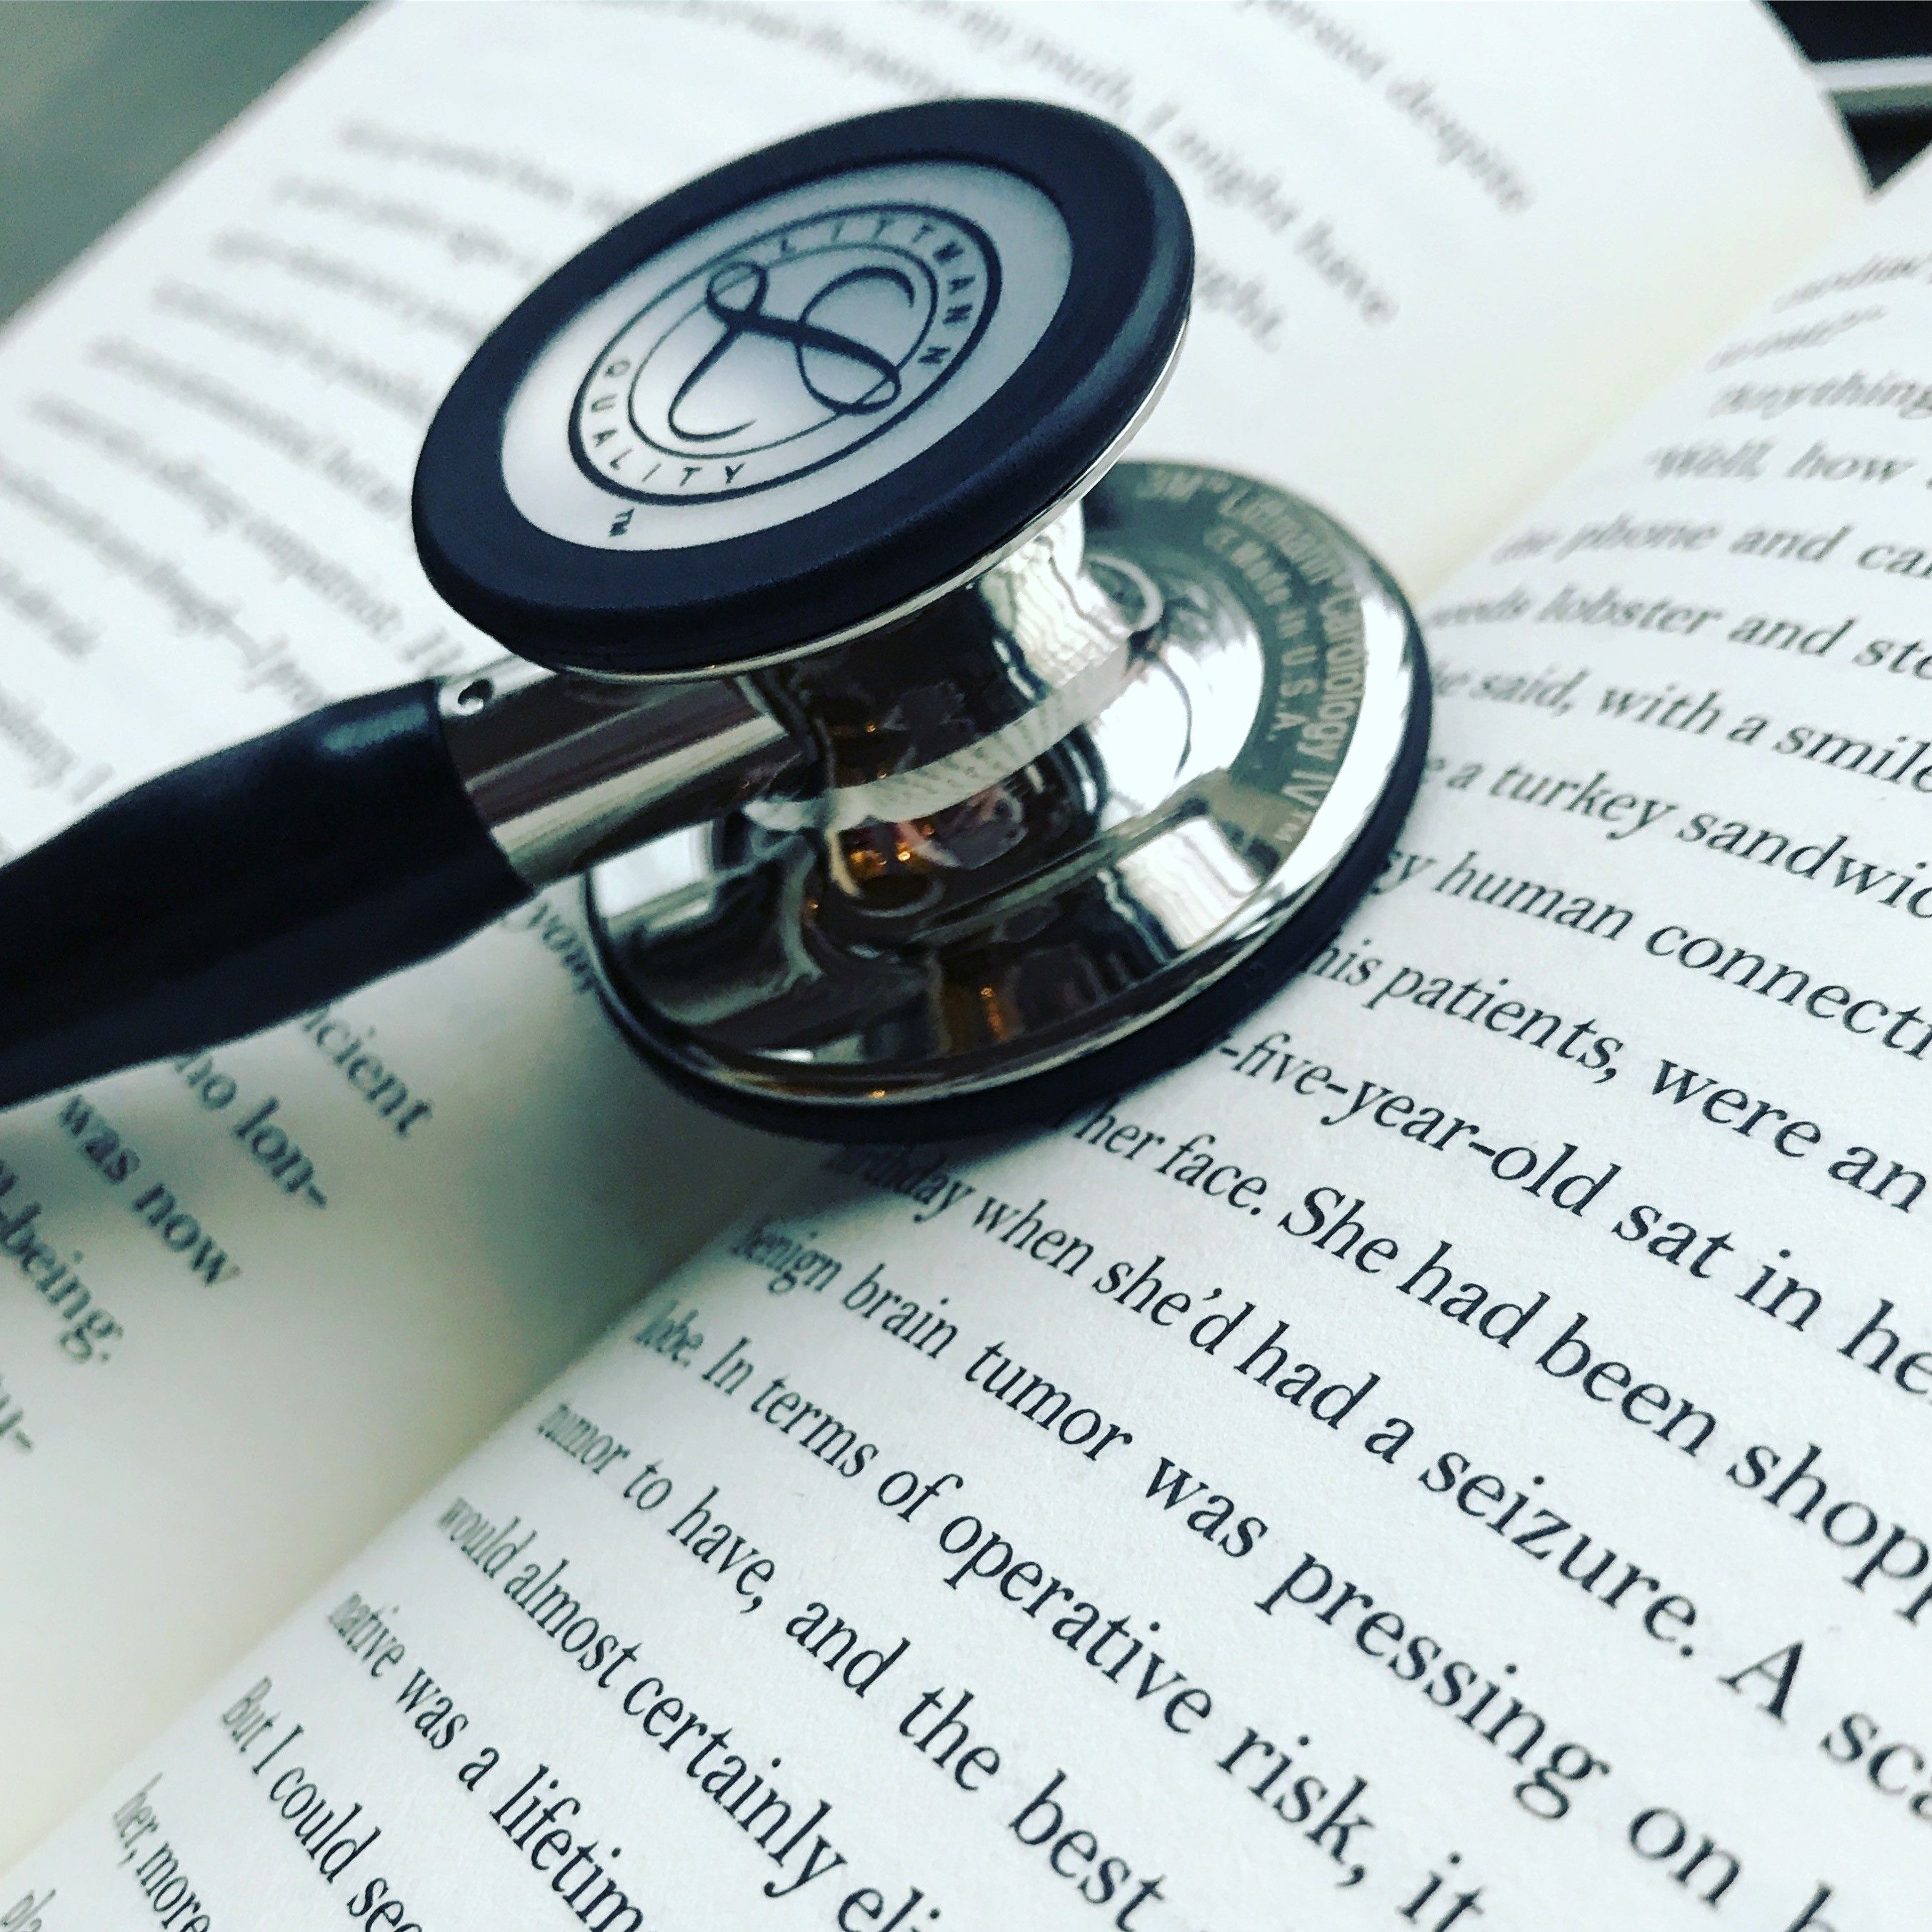 Mashups, mysteries, memoirs. What are you reading? Cardiology IV Black with Mirror Stethoscope. Stethoscope, Medical wallpaper, Medical school motivation